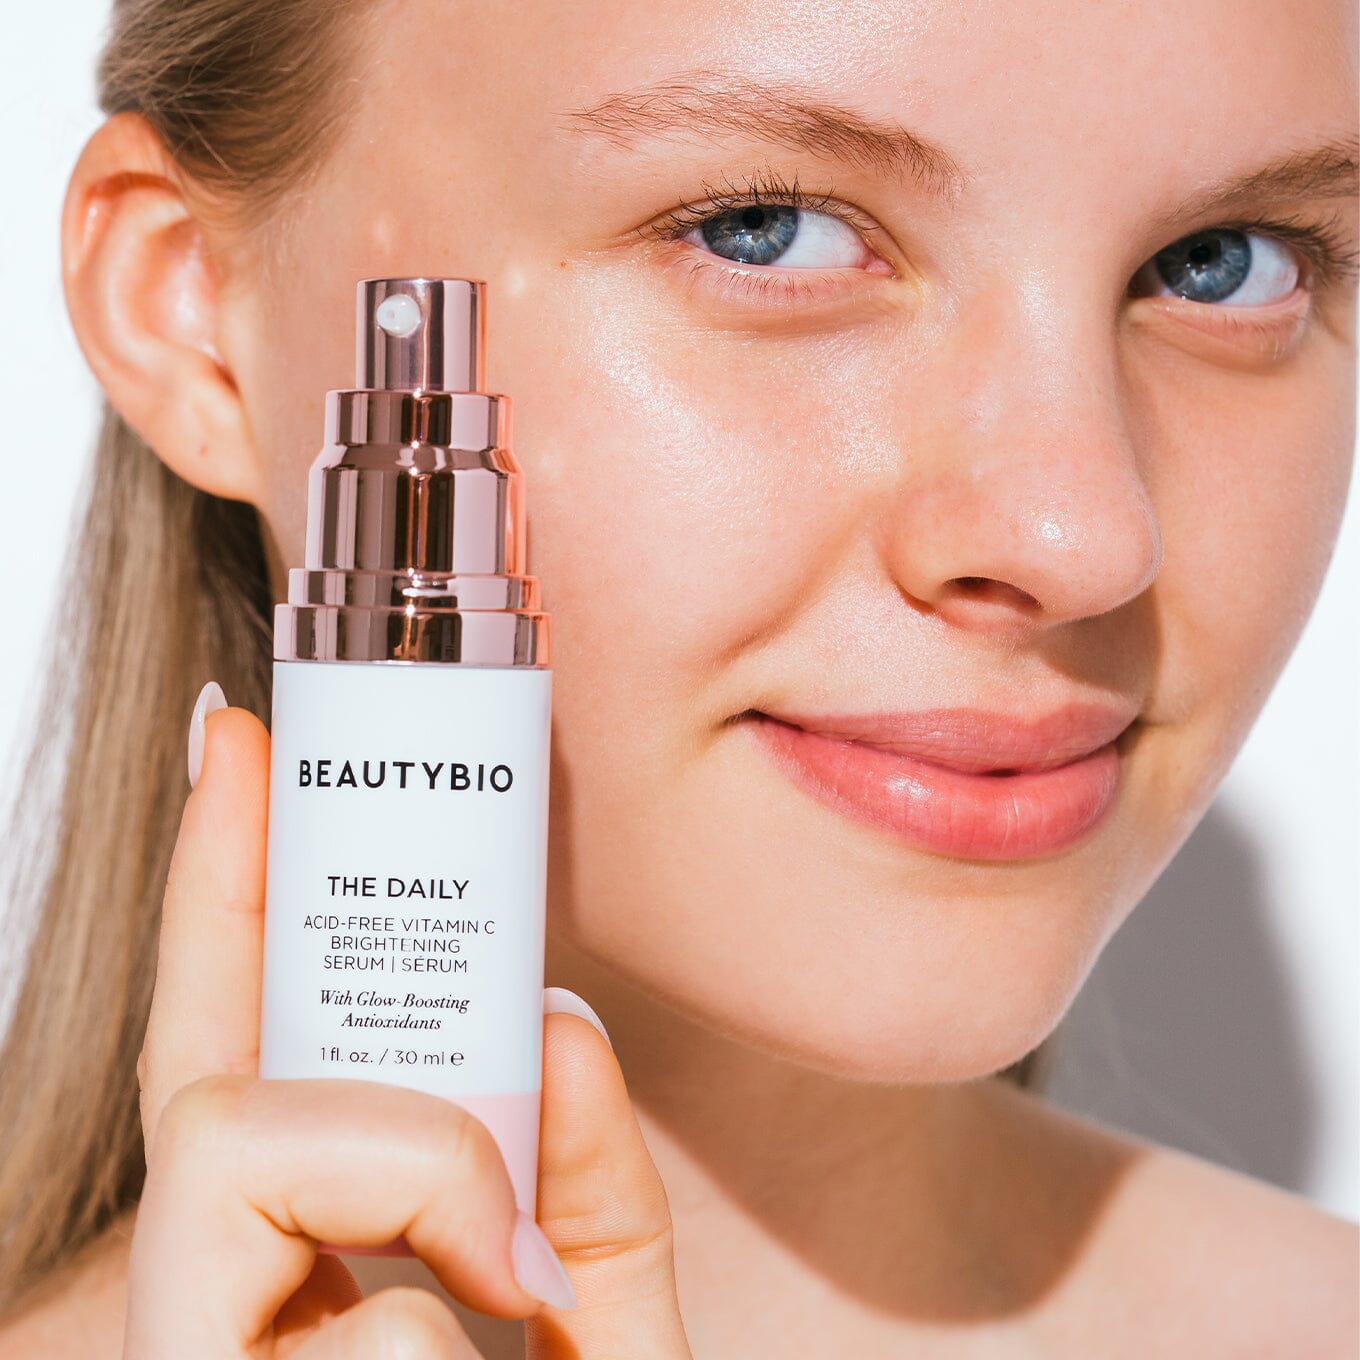 så dump Retfærdighed BeautyBio The Daily Intensive Vitamin C Cocktail Serum